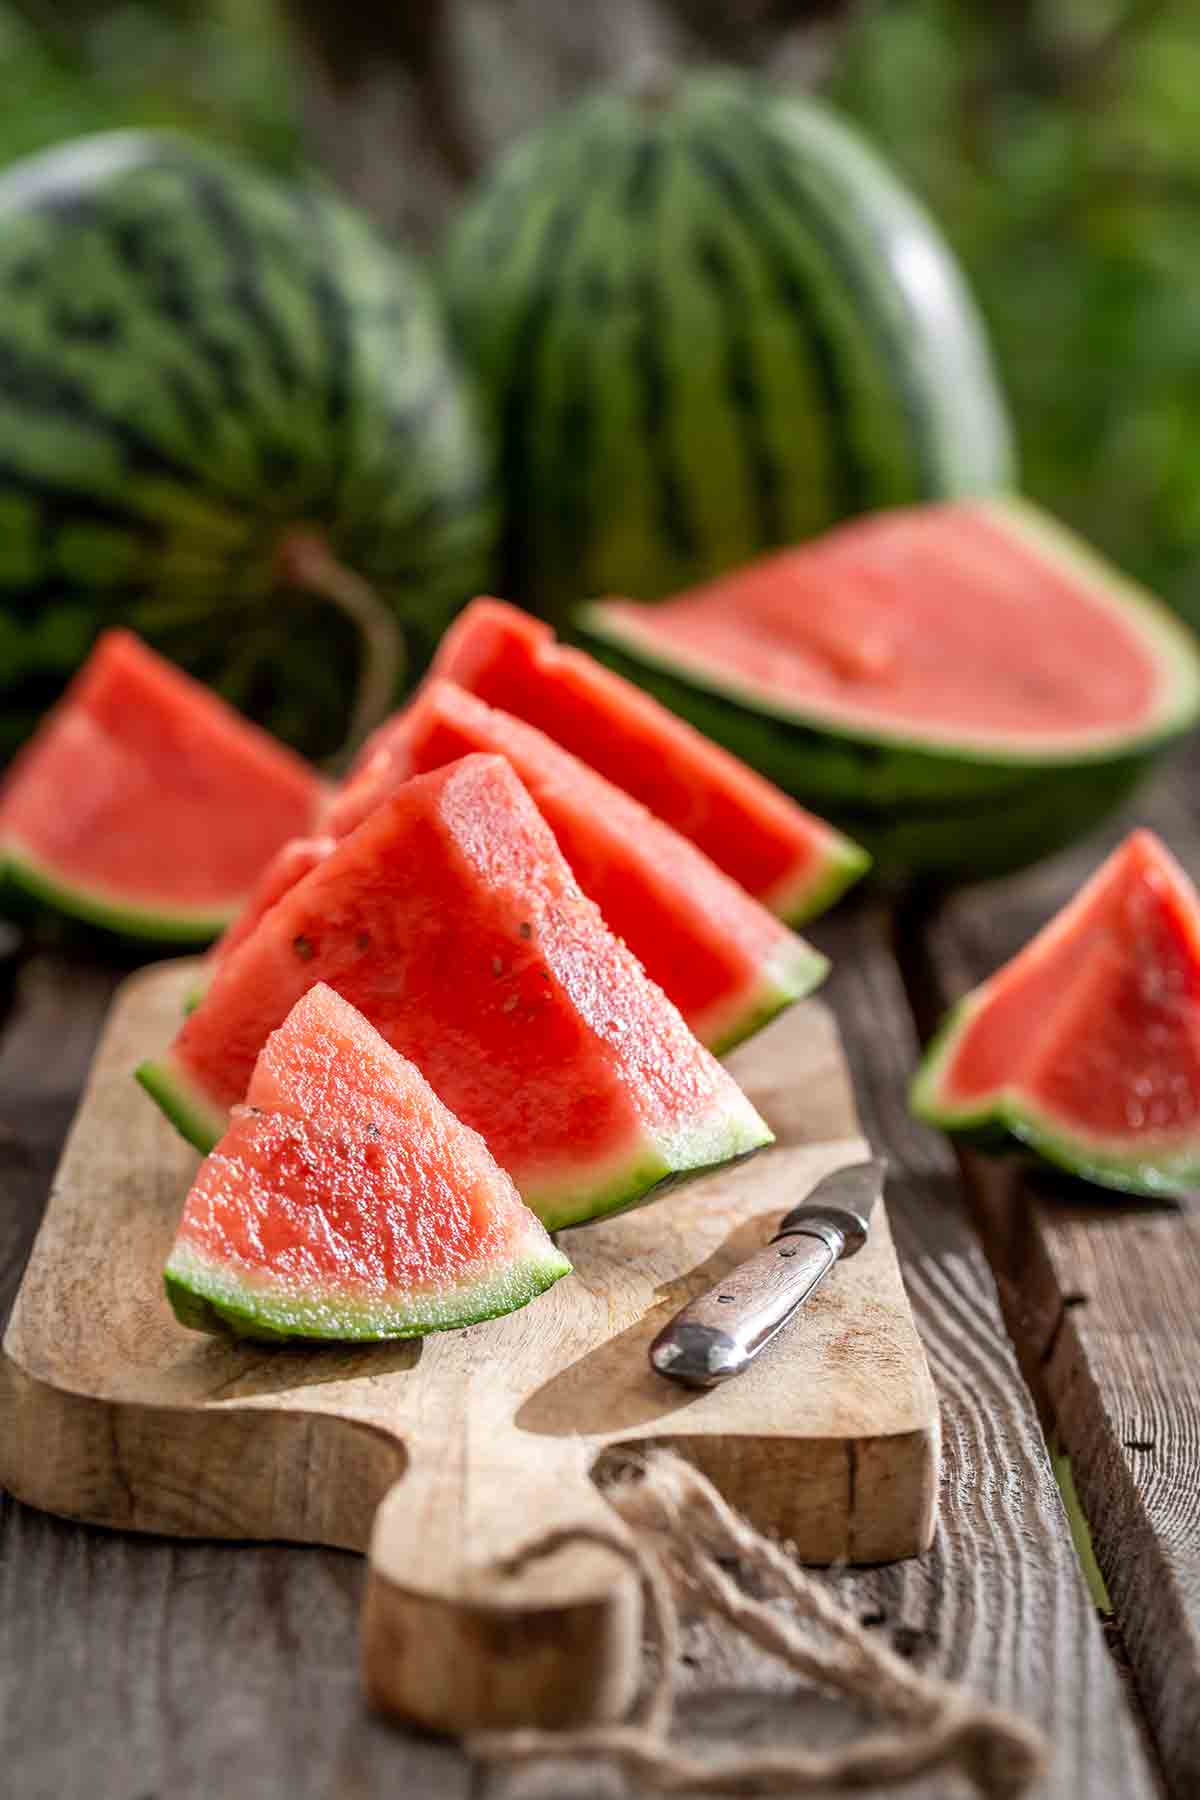 Wedges of watermelon on a cutting board, a knife on the side, and watermelons in the background.